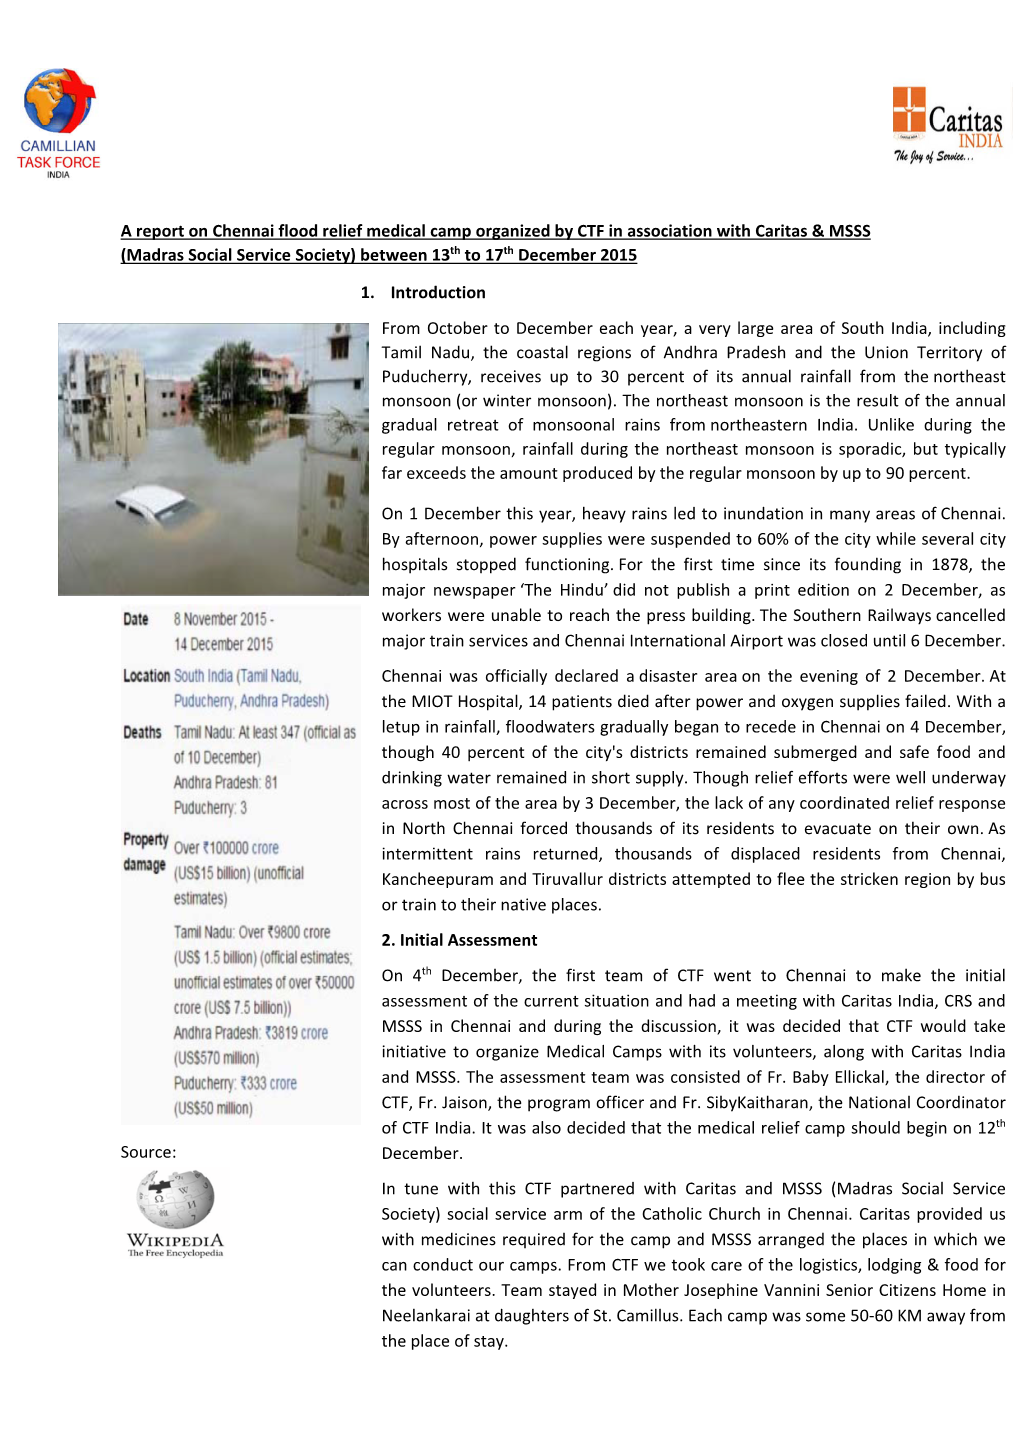 A Report on Chennai Flood Relief Medical Camp Organized by CTF in Association with Caritas & MSSS (Madras Social Service Society) Between 13Th to 17Th December 2015